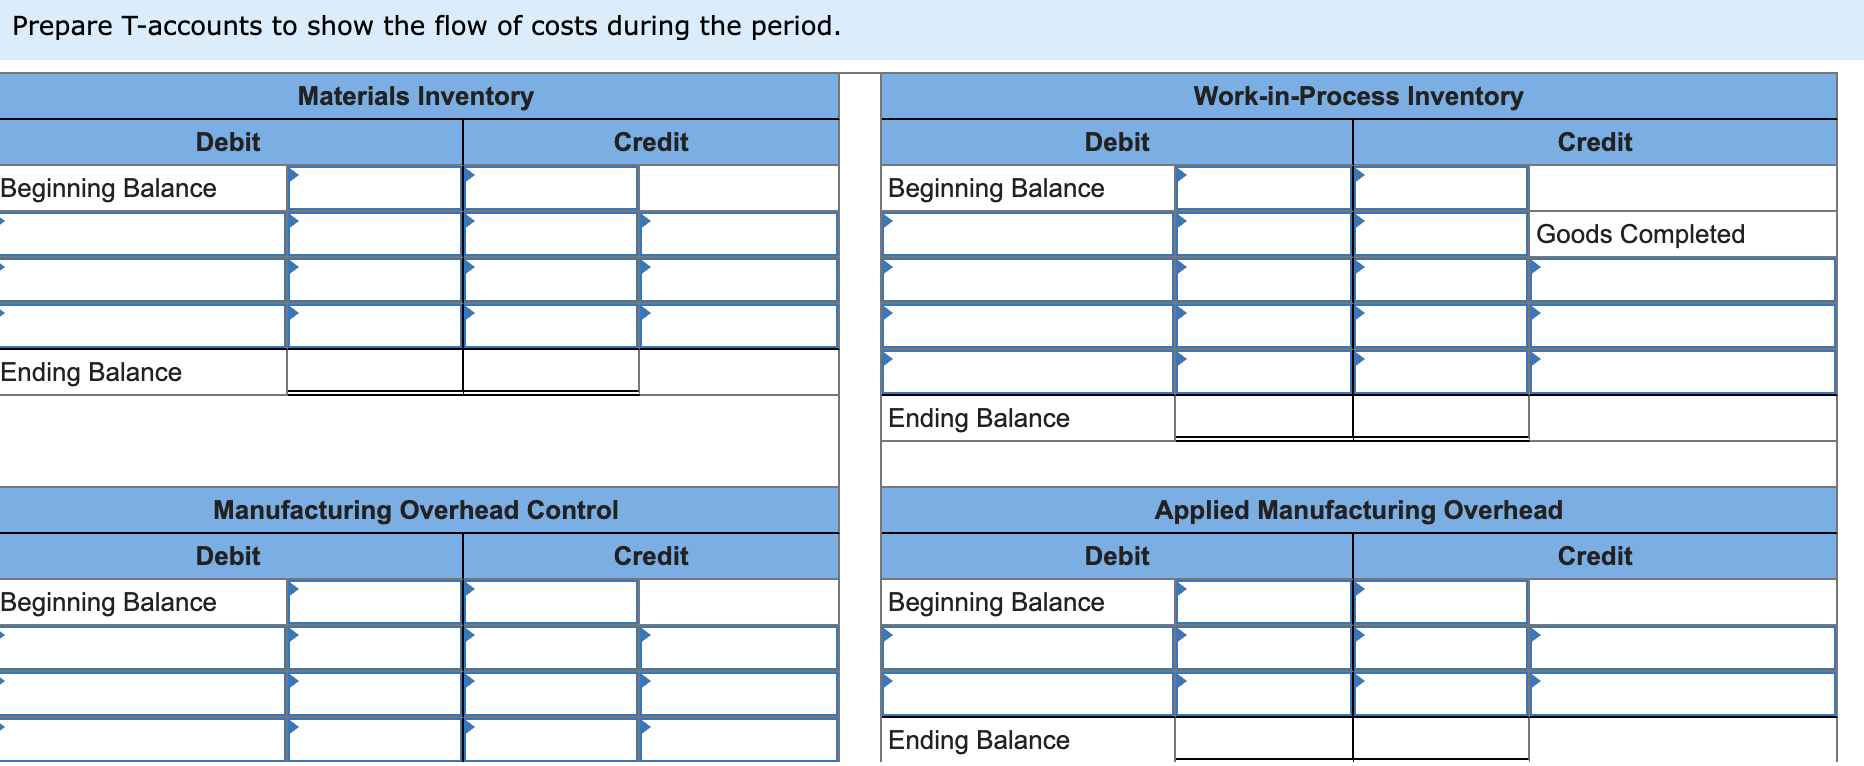 Prepare T-accounts to show the flow of costs during the period. Materials Inventory Debit Beginning Balance